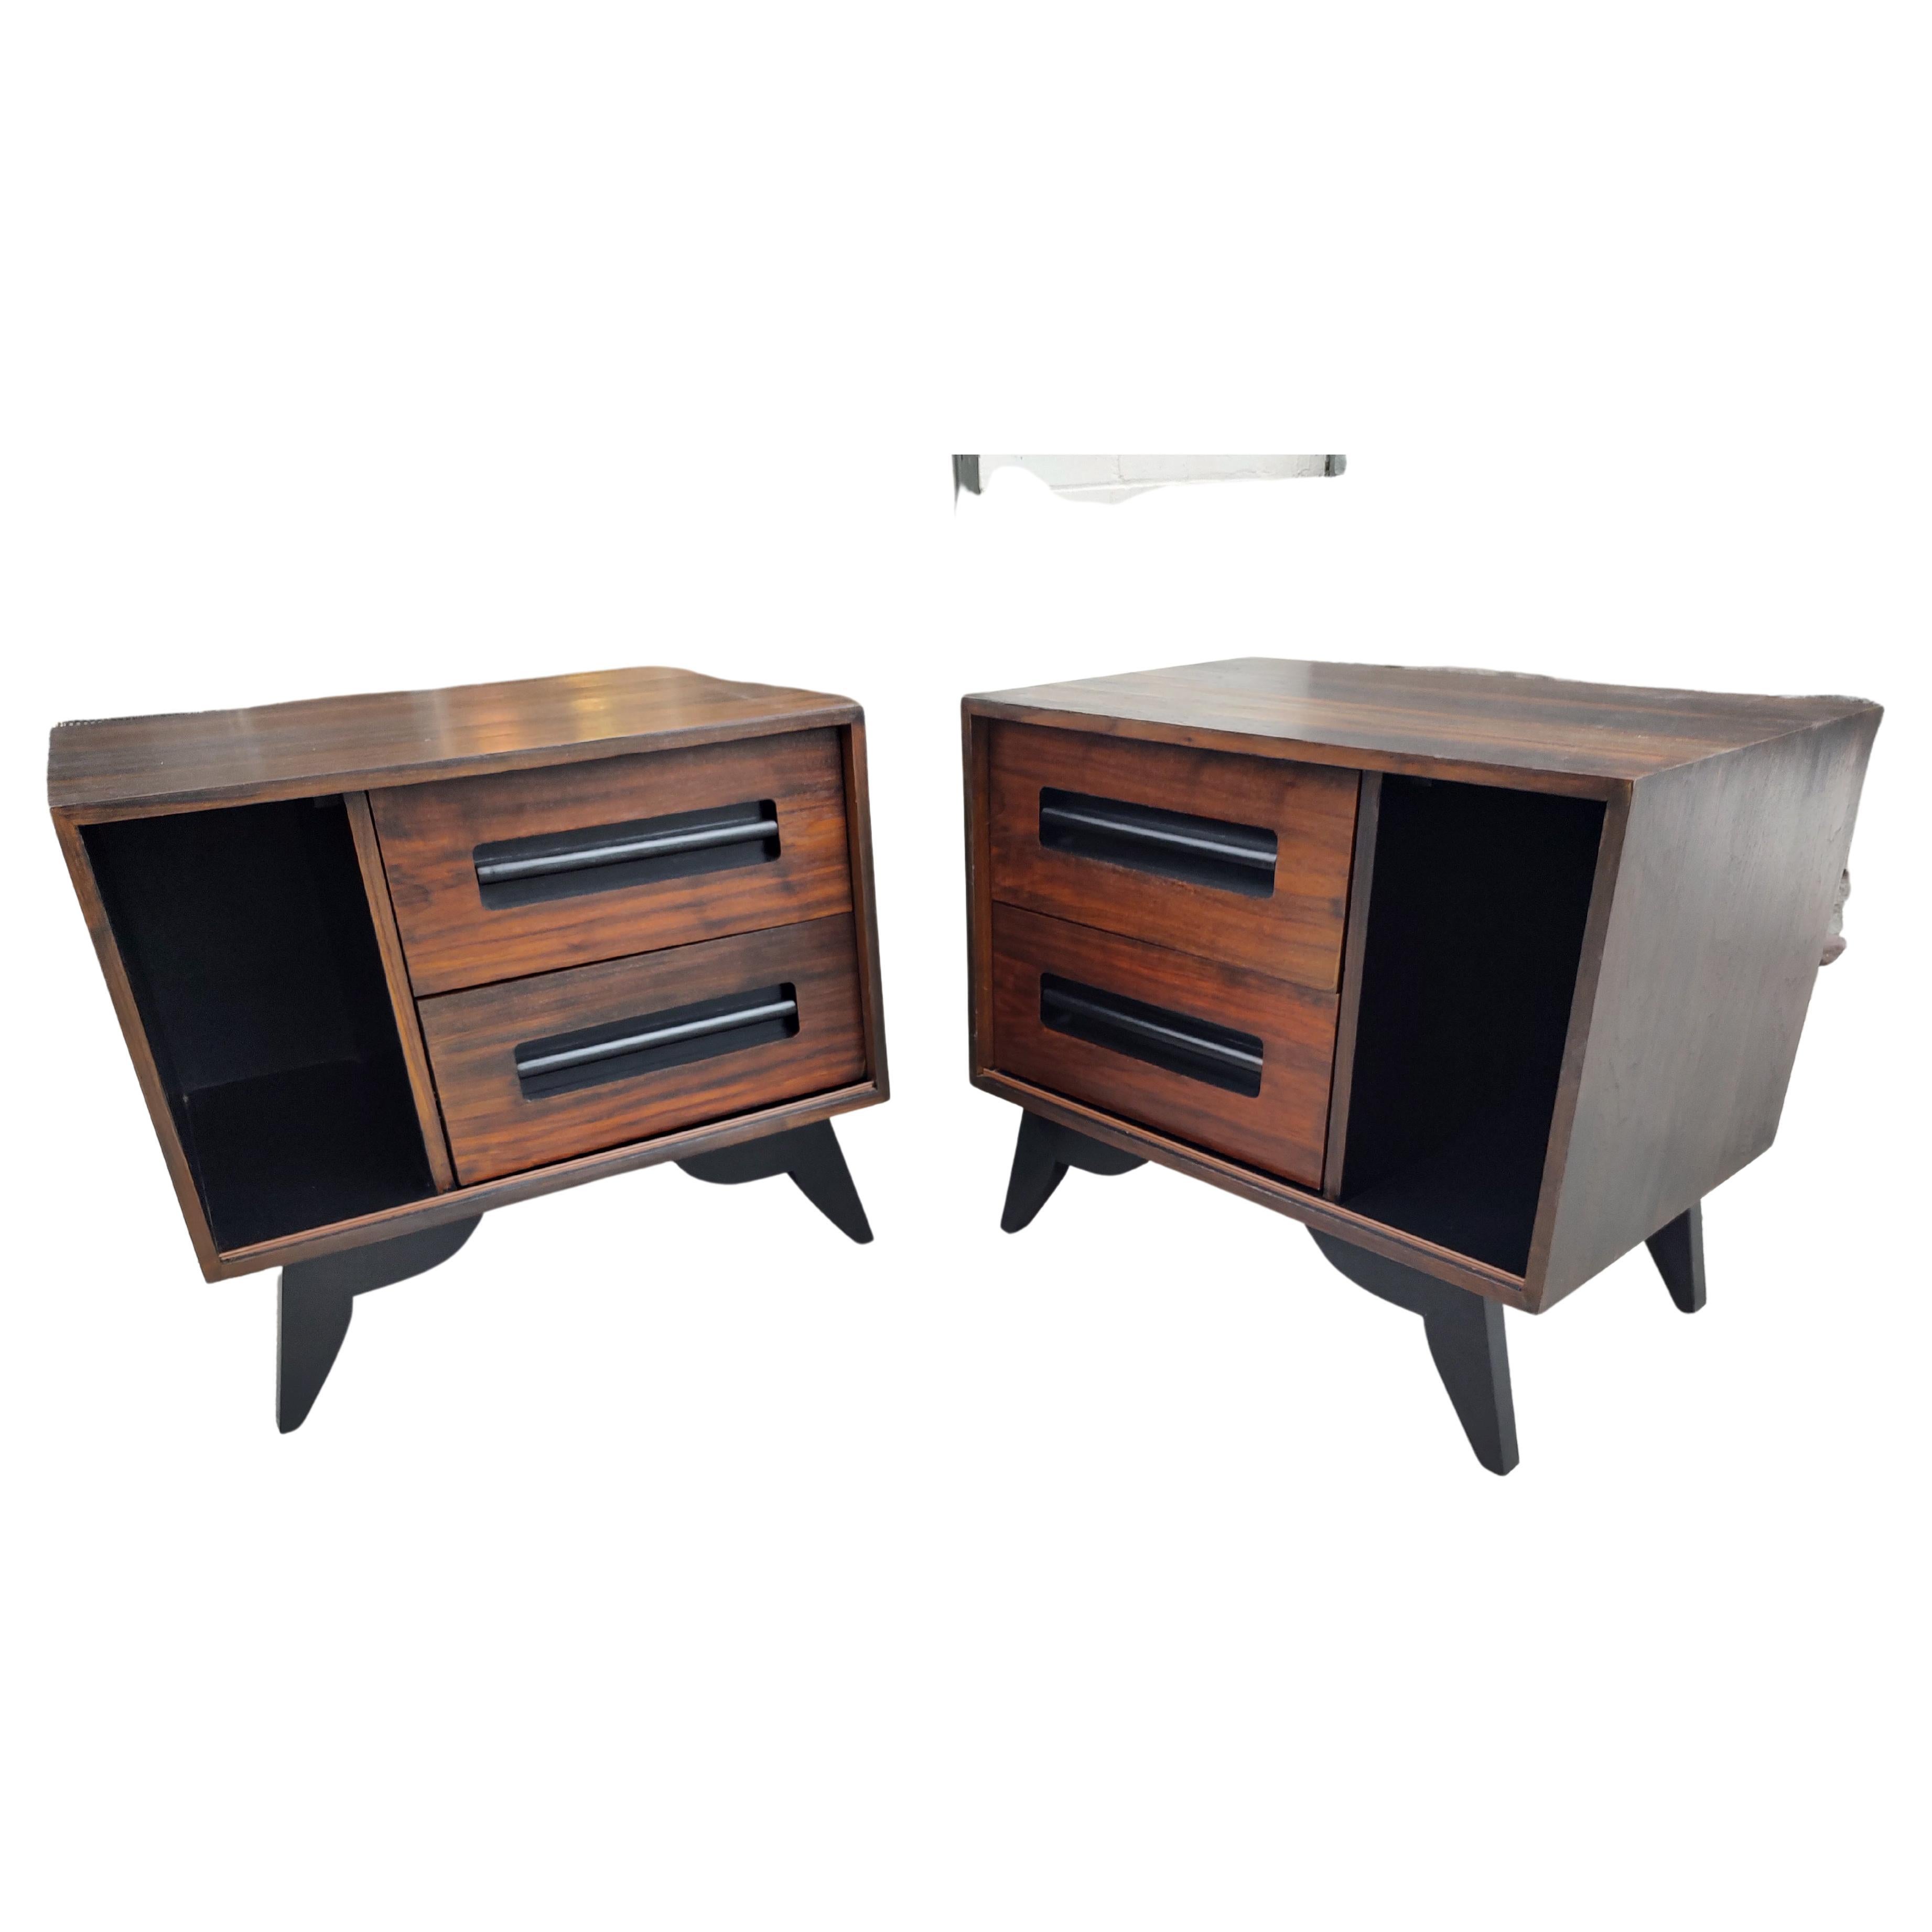 Fabulous pair of Mid-Century Modern Sculptural Scandinavian Rosewood and Black Lacquer nightstands. Two drawers & a opening for having a space at the ready. In excellent vintage condition with minimal wear. These were refinished not long ago. Sold